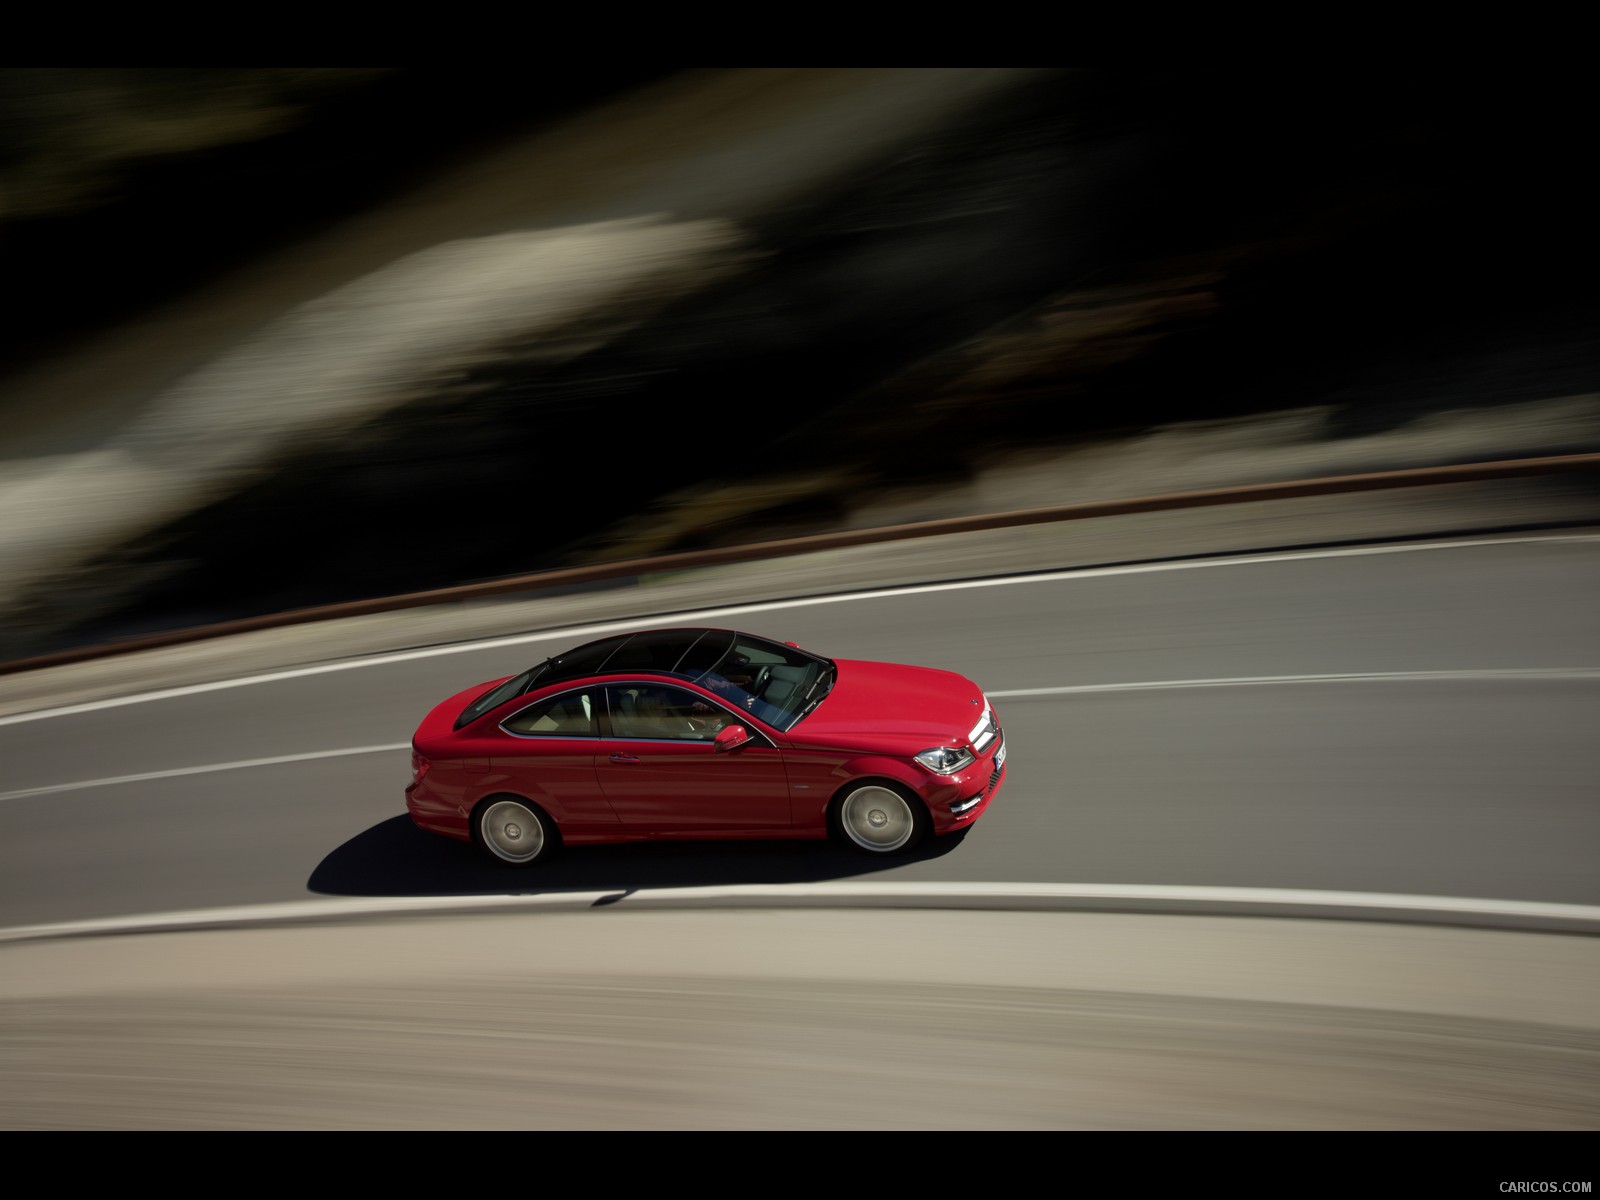 Mercedes-Benz C-Class Coupe (2012)  - Top, #34 of 79